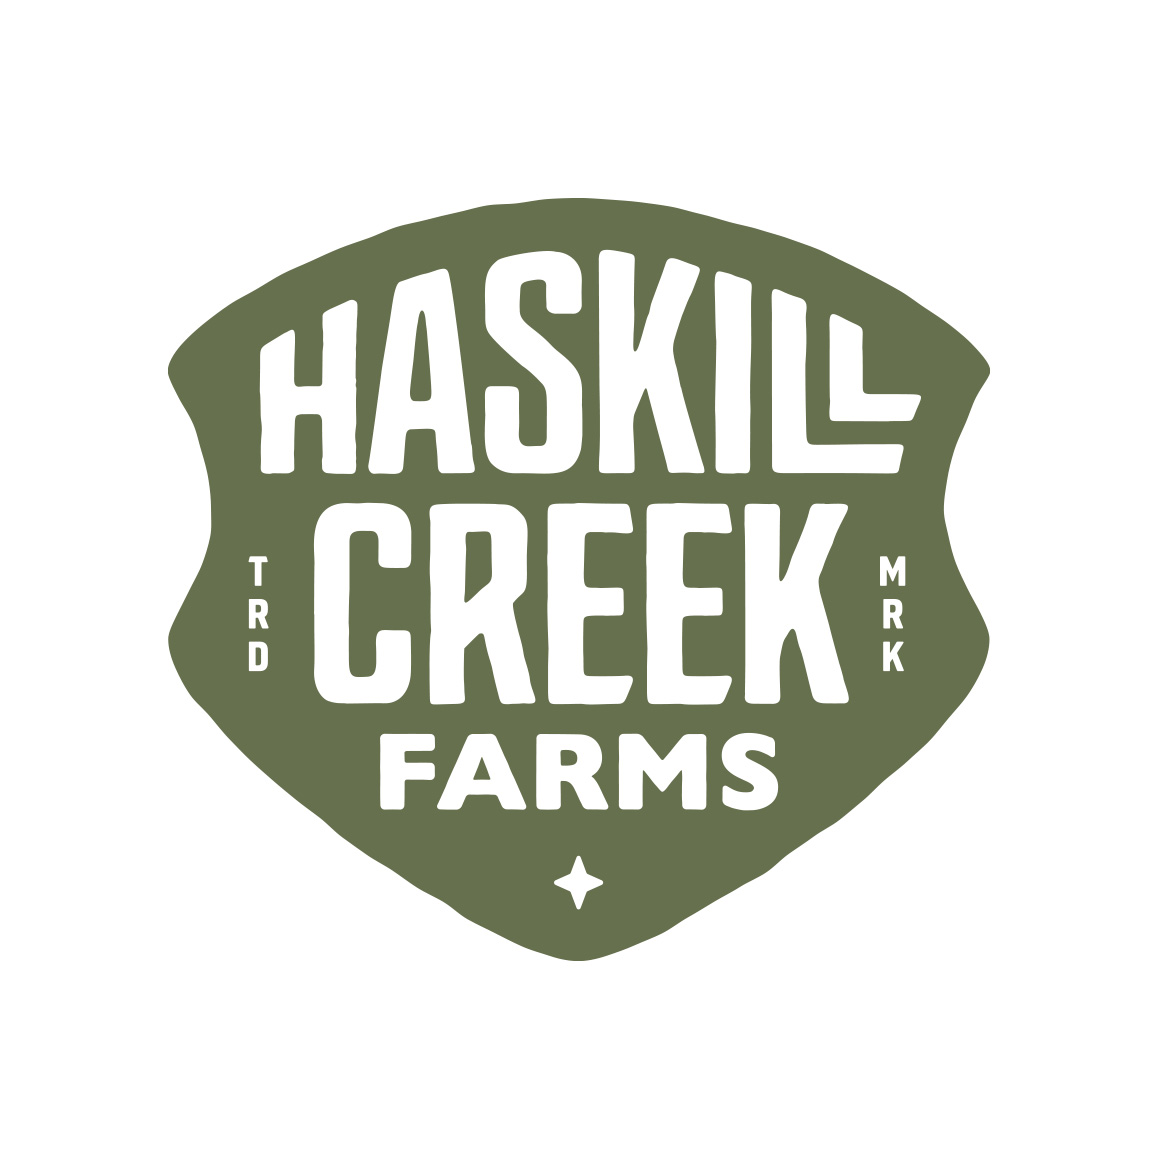 Haskill Creek Farms Shield logo design by logo designer Joshua Berman Design for your inspiration and for the worlds largest logo competition